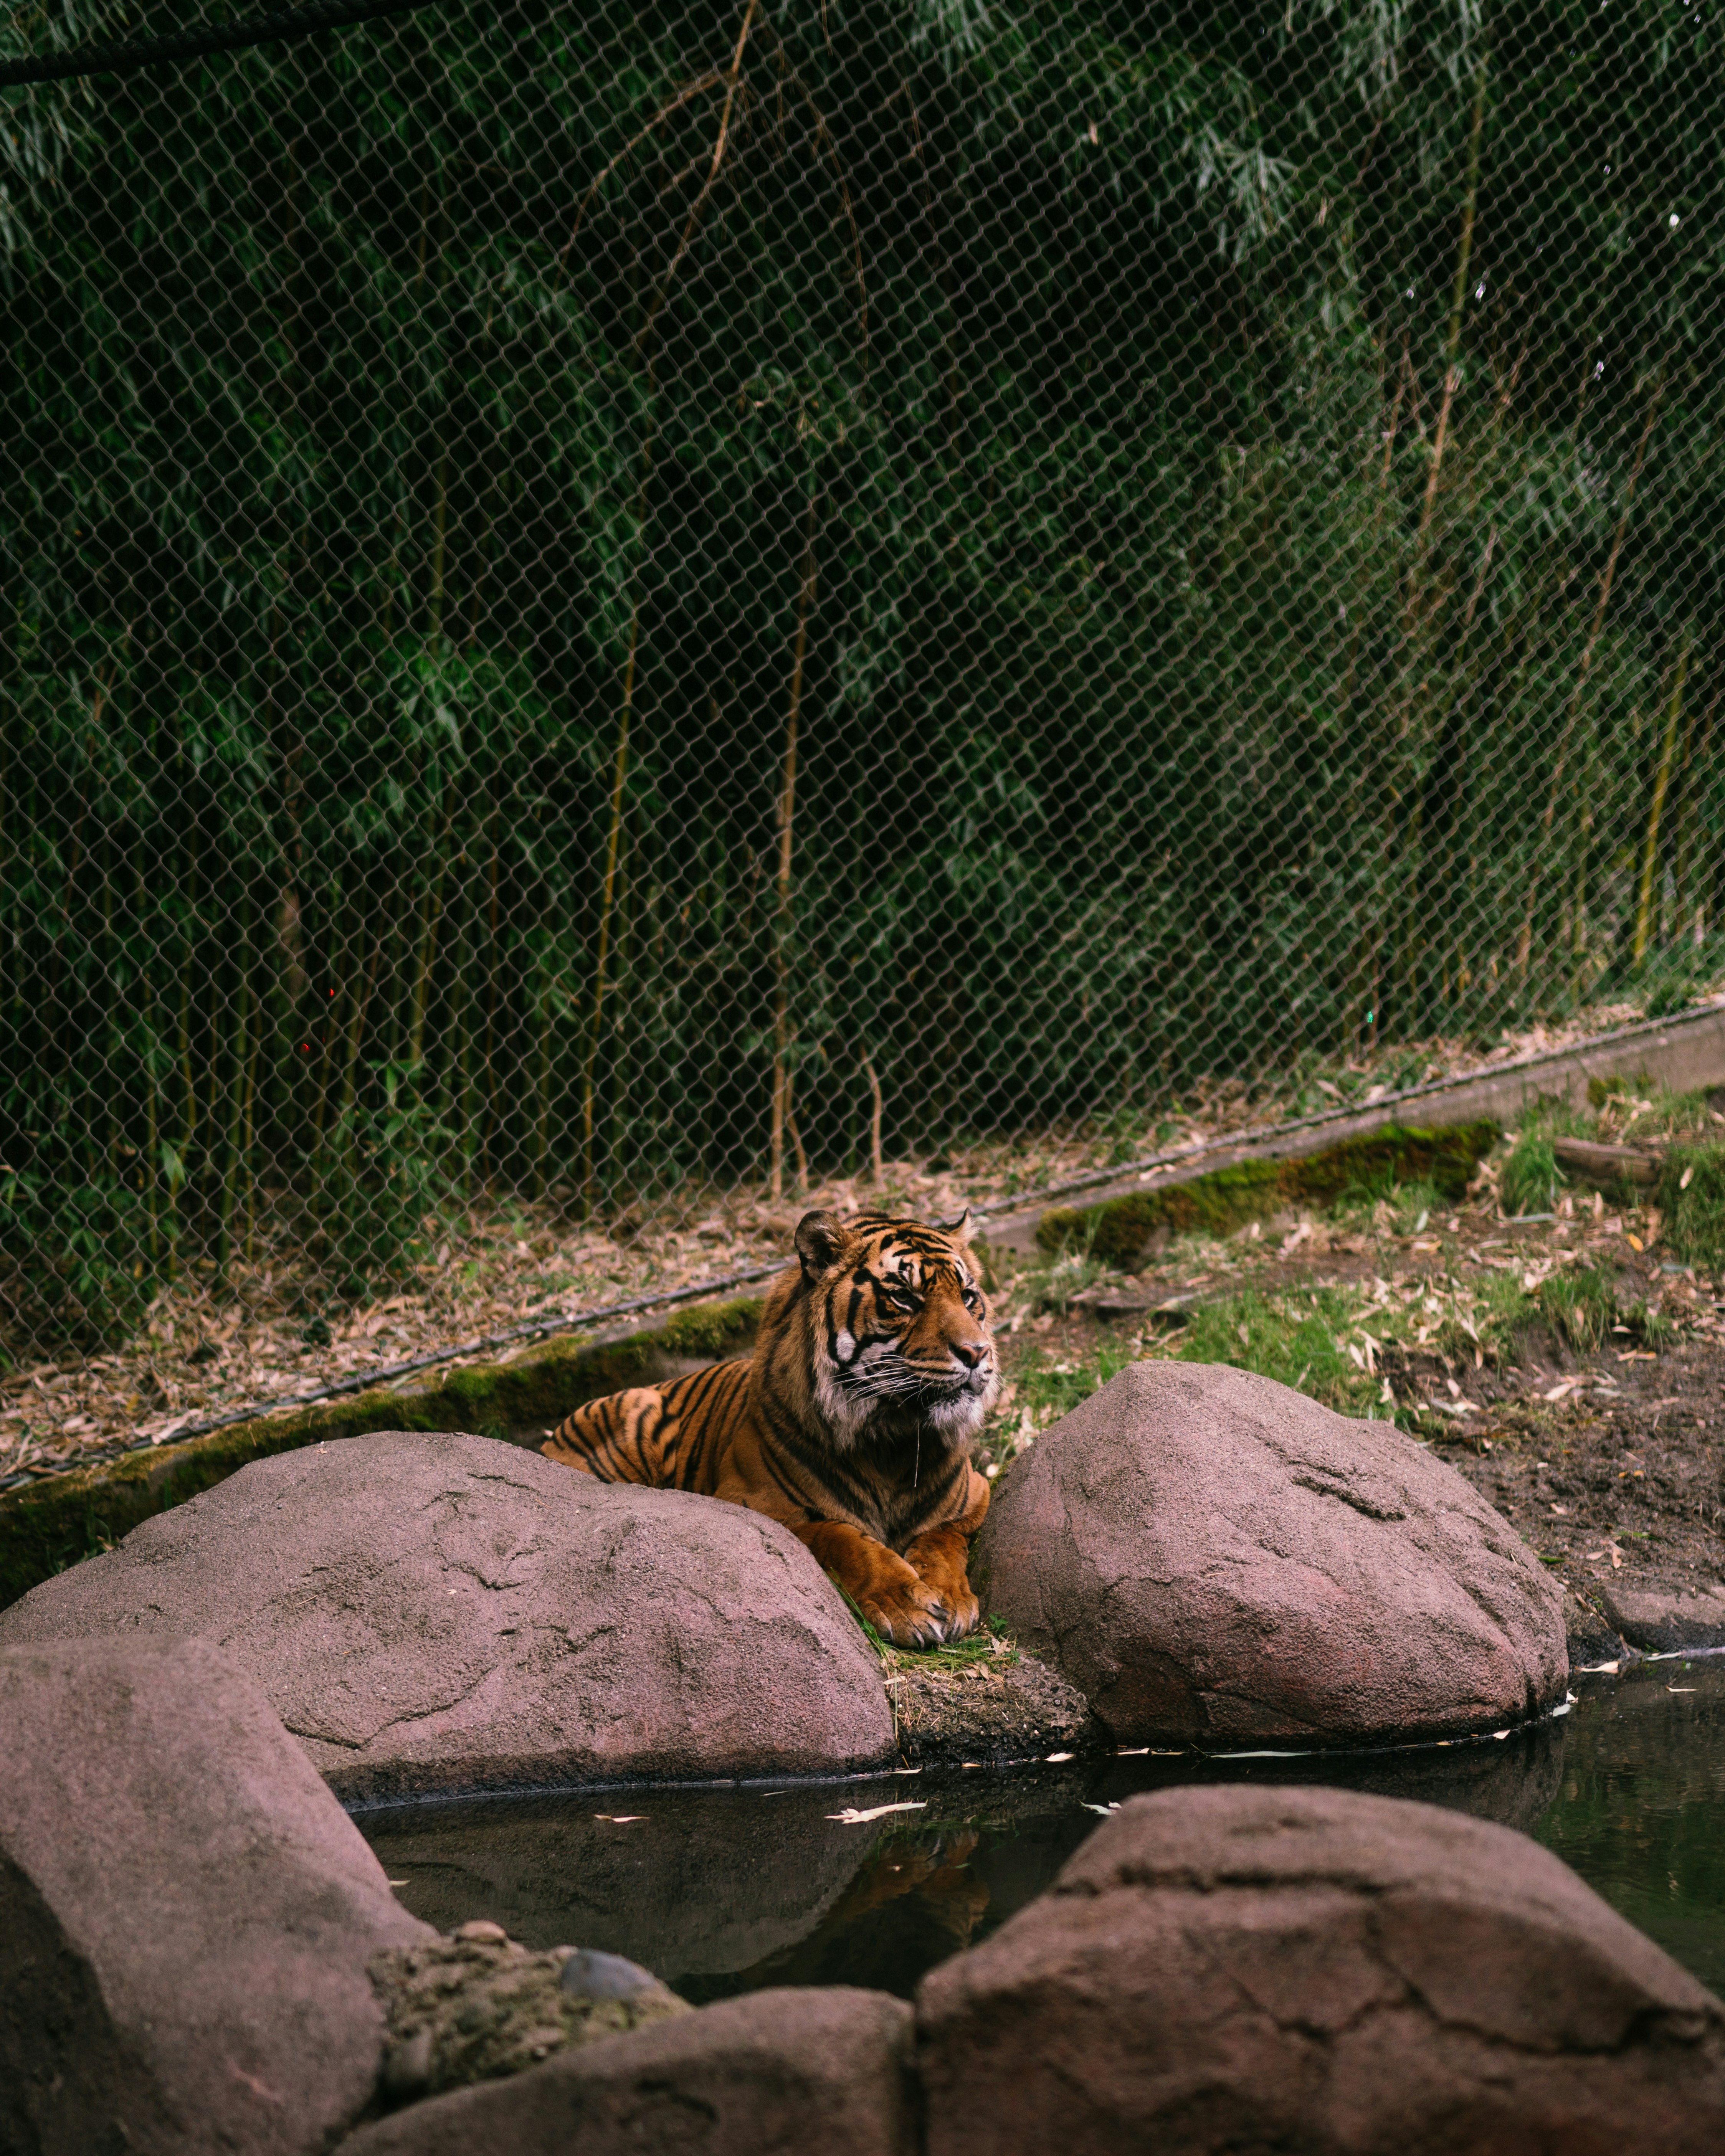 tiger lying on rock near green grass during daytime